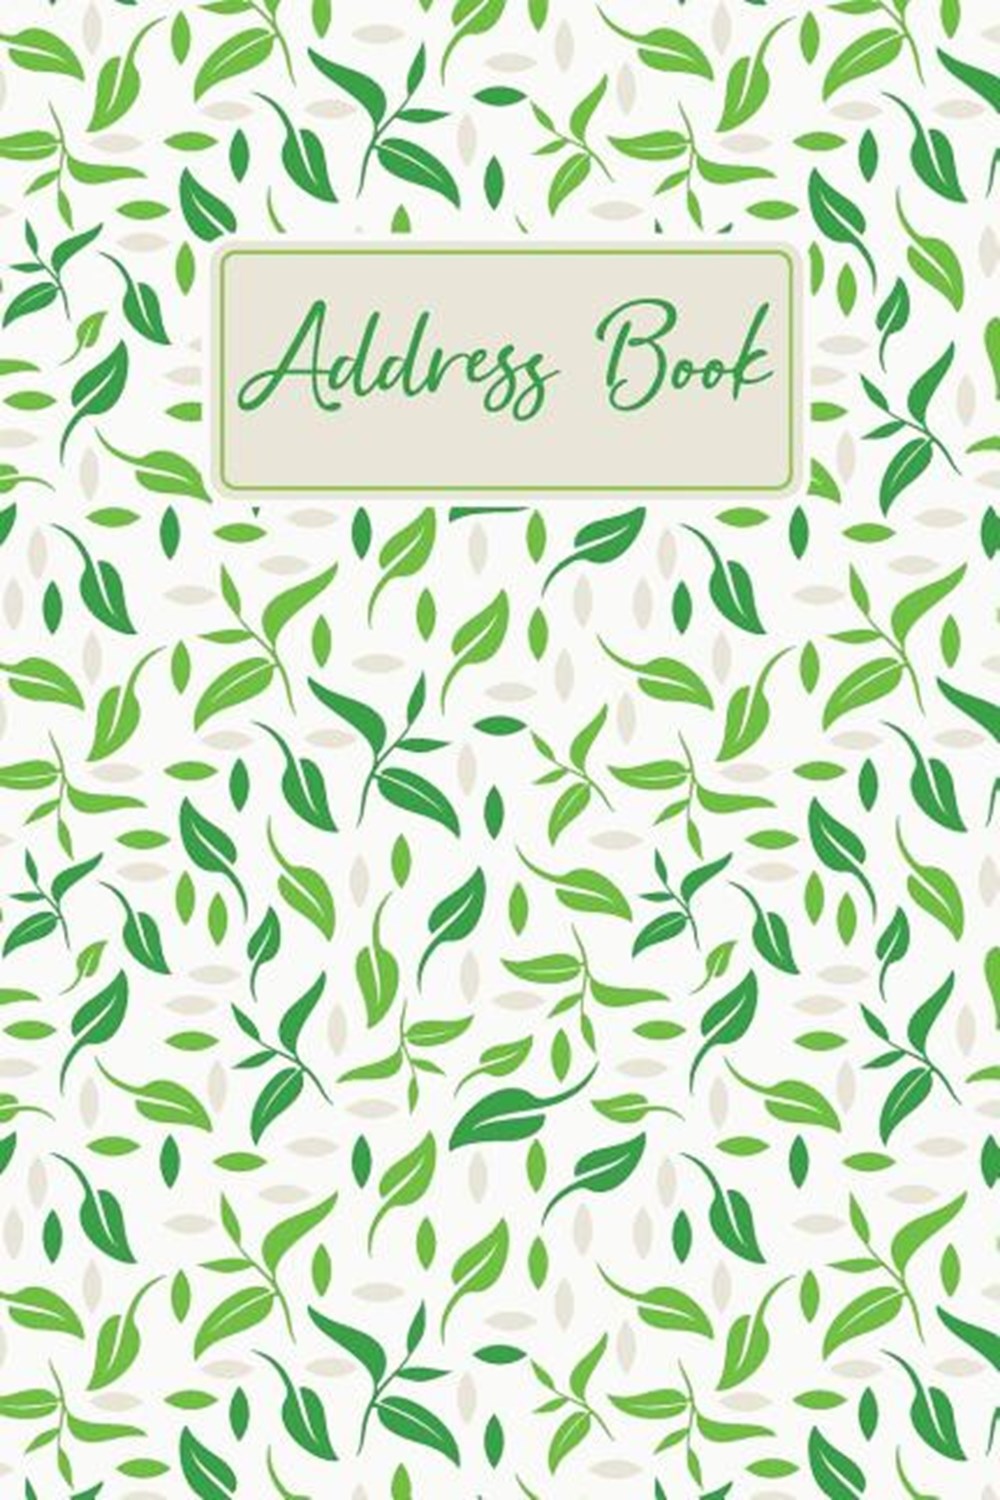 Address Book Tea Leaves Cover - Cute Address & Phone Number Book - Contact Log Book - Email and Birt